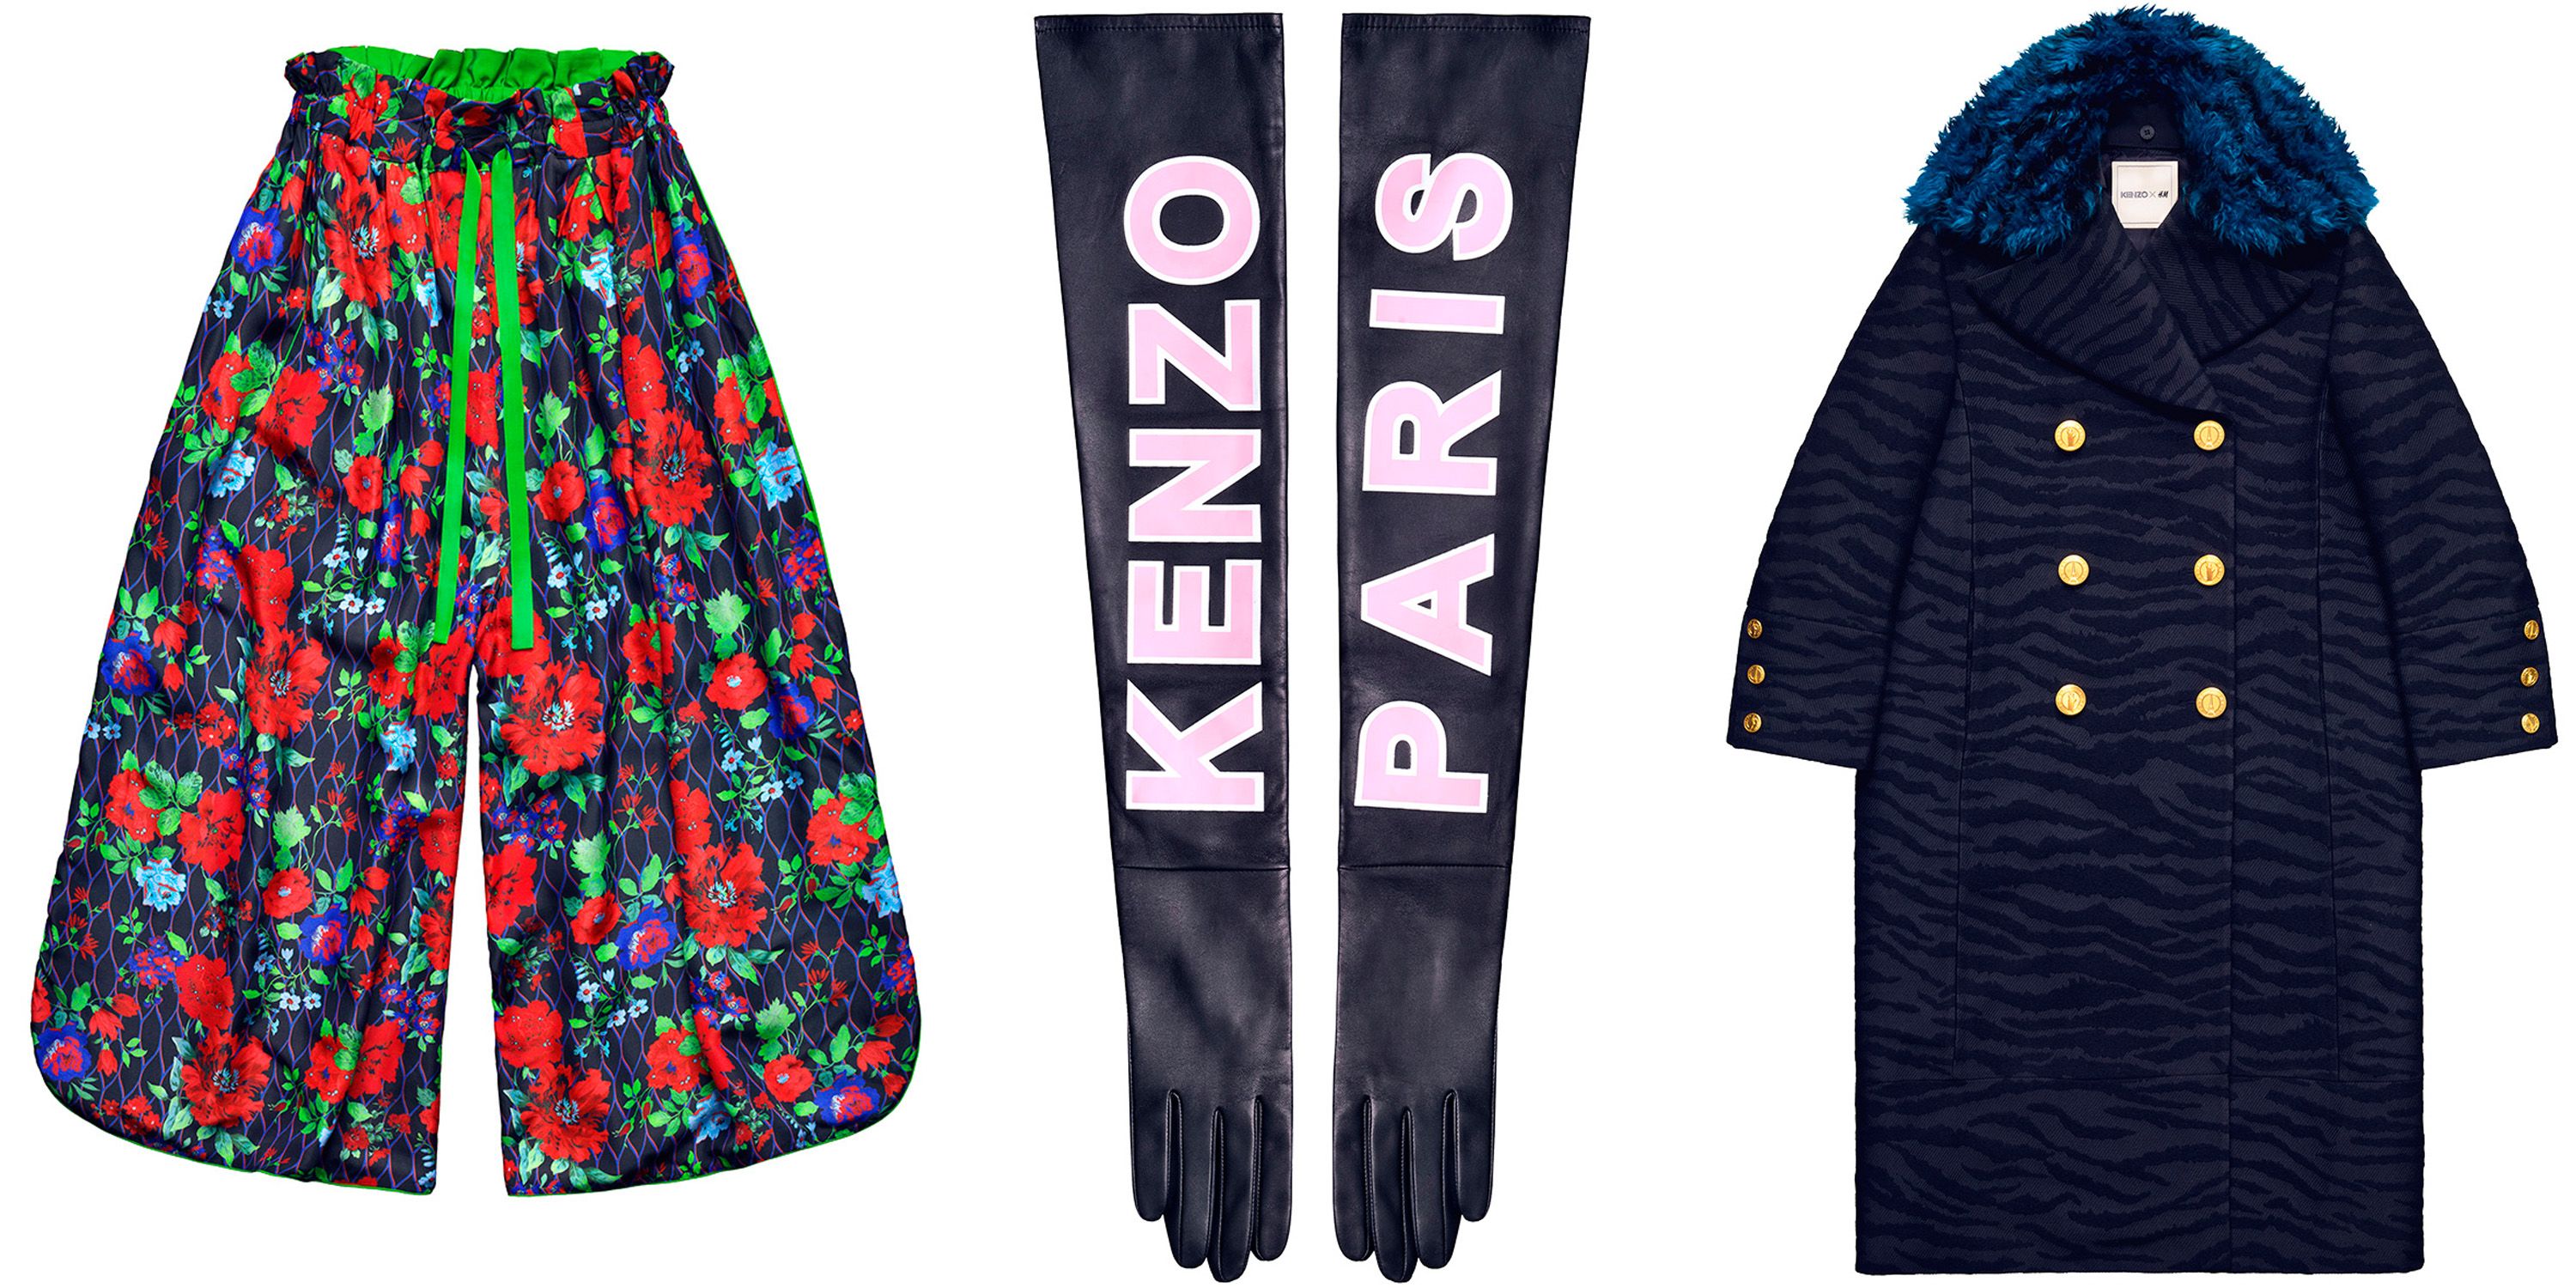 The Best Pieces from the Kenzo x H&M Collab - 50 Pieces from the